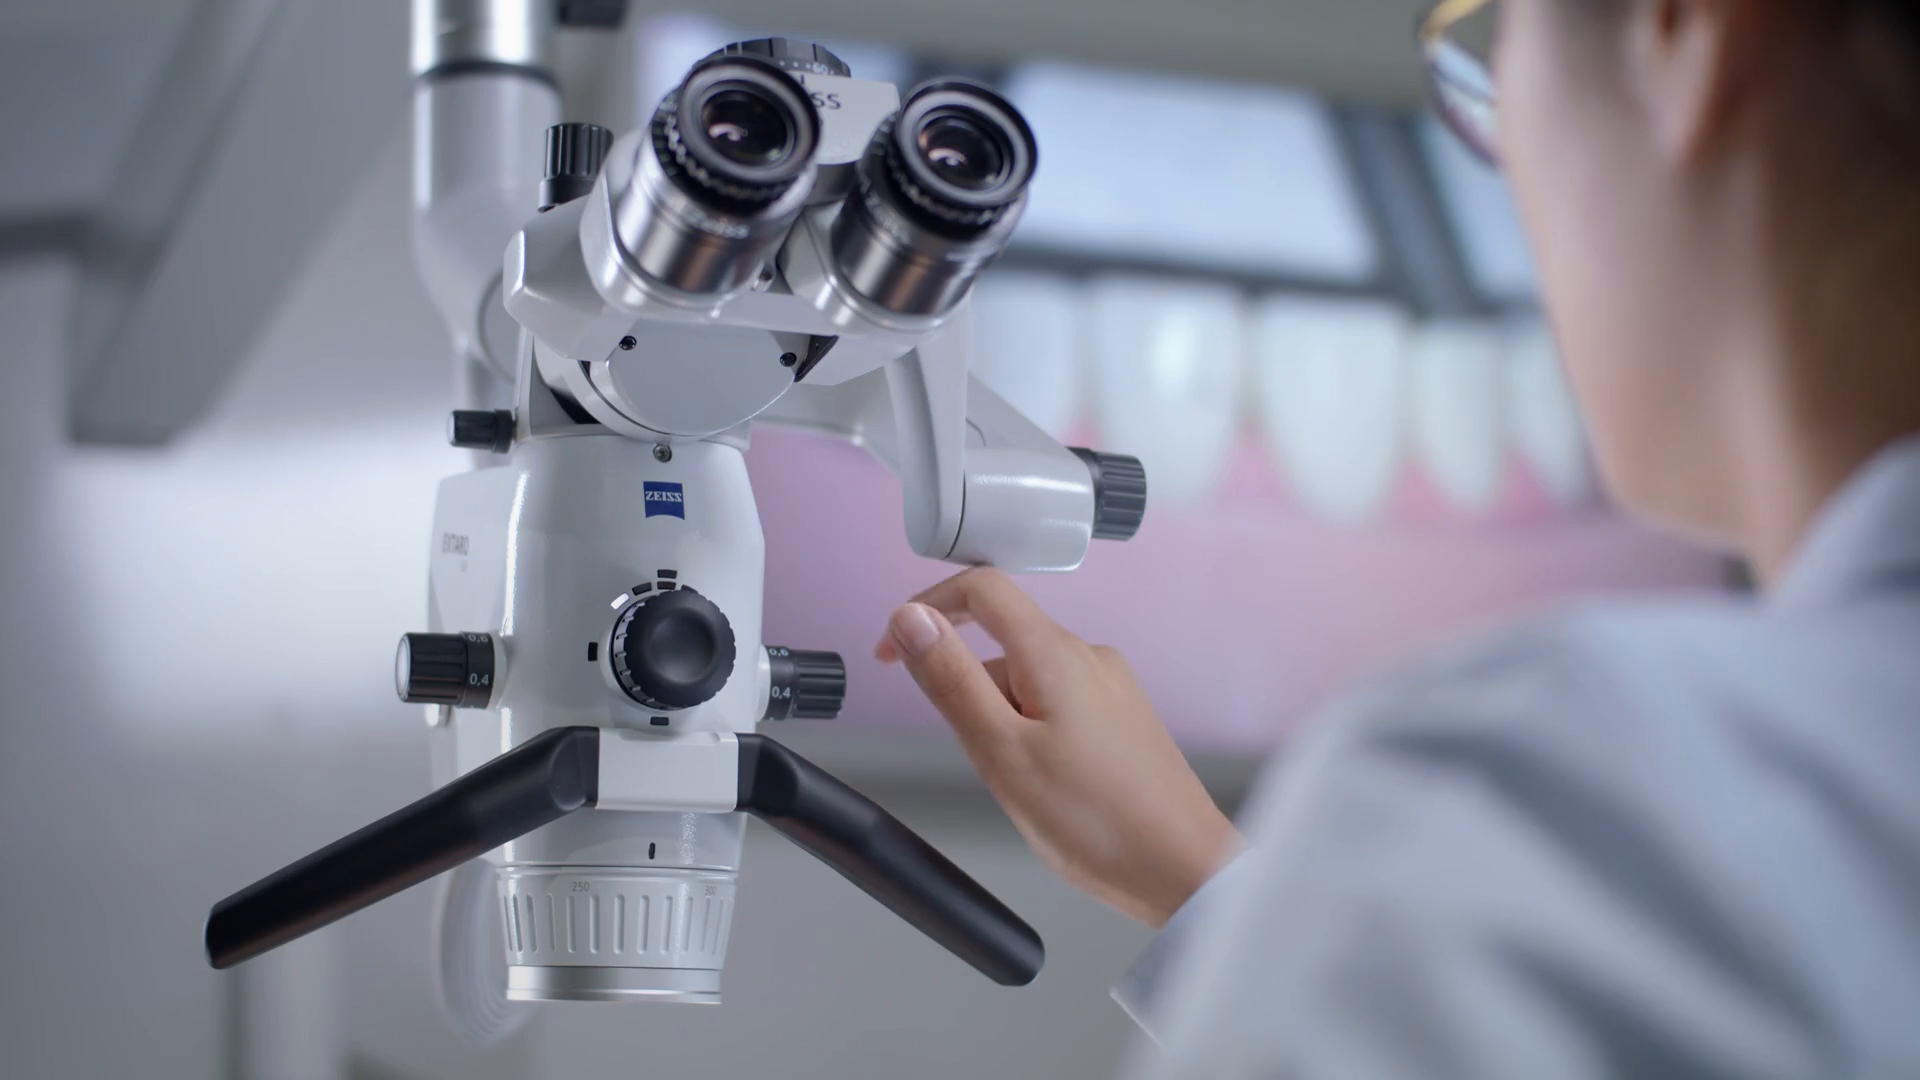 How to set up a dental microscope